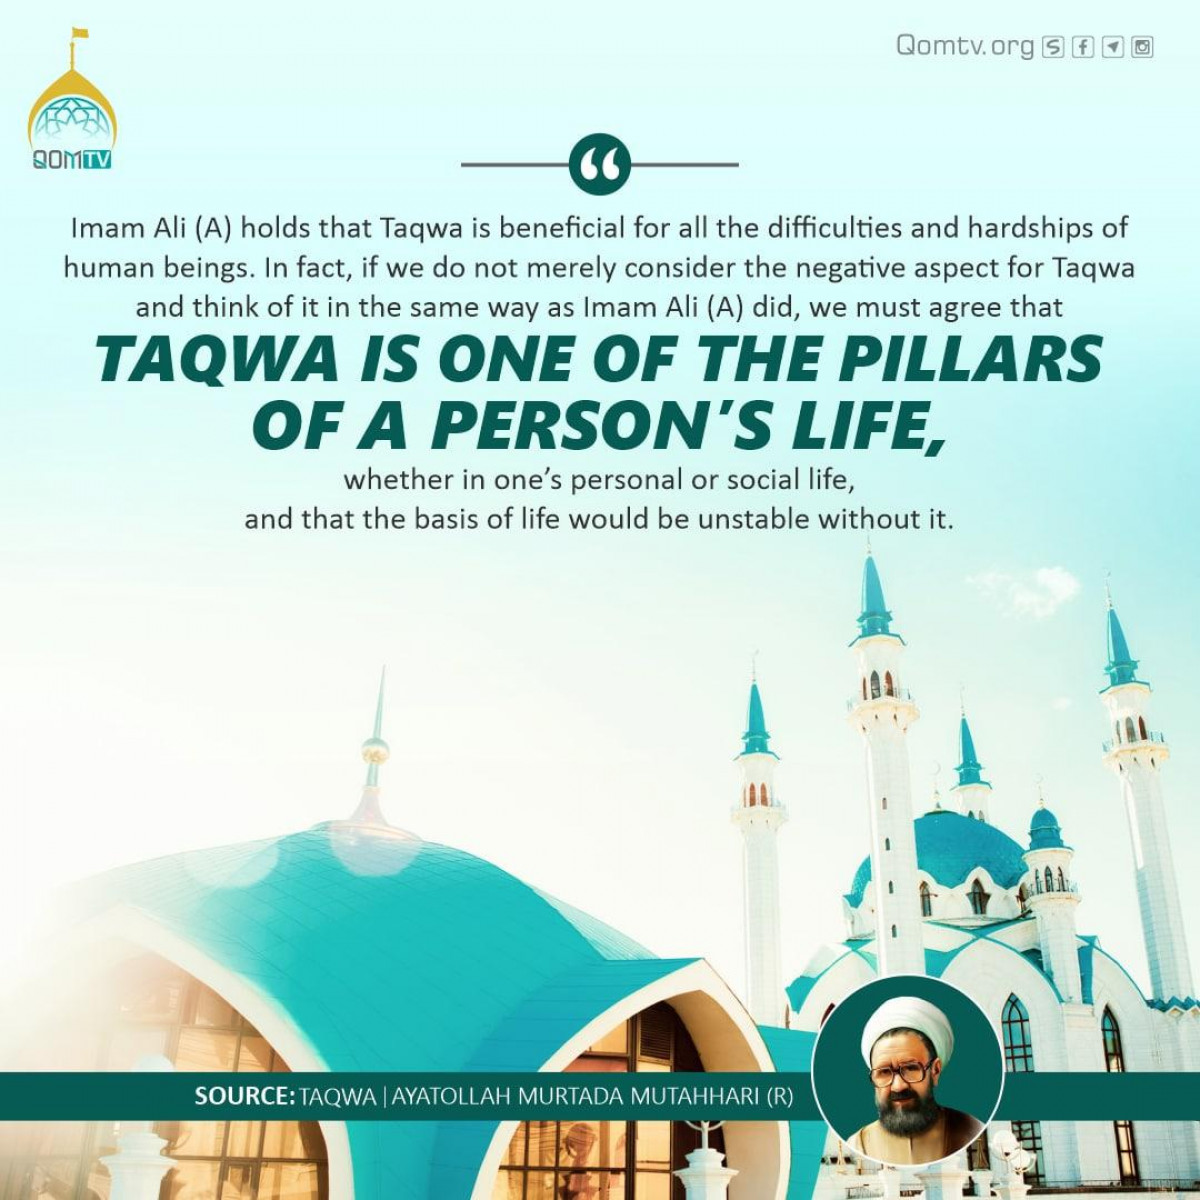 Taqwa is one of the pillars of a person’s life, whether in one’s personal or social life